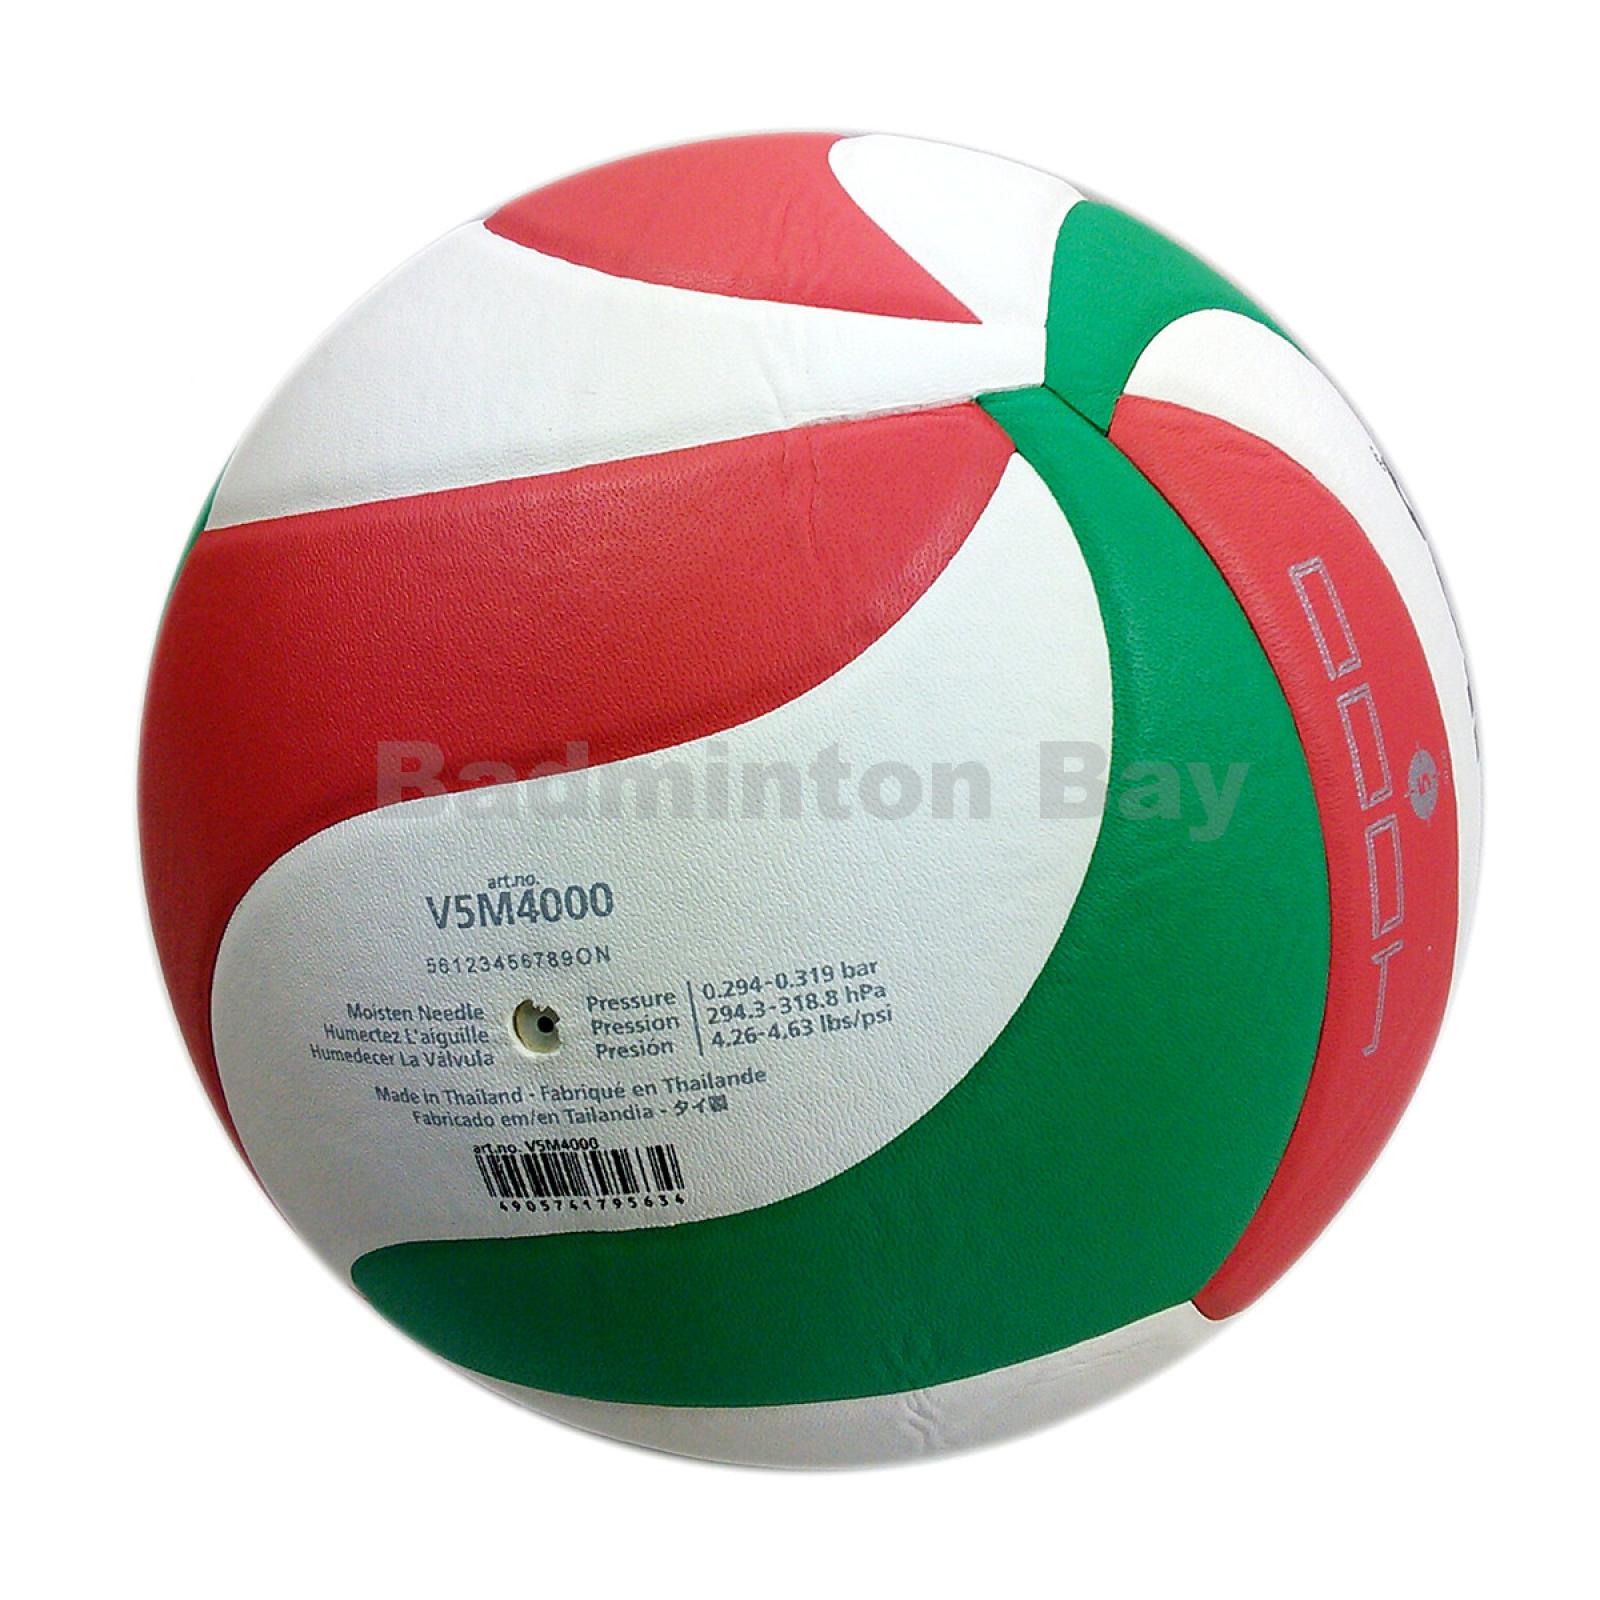 White/Green/Red 5 Molten Volley Ball 